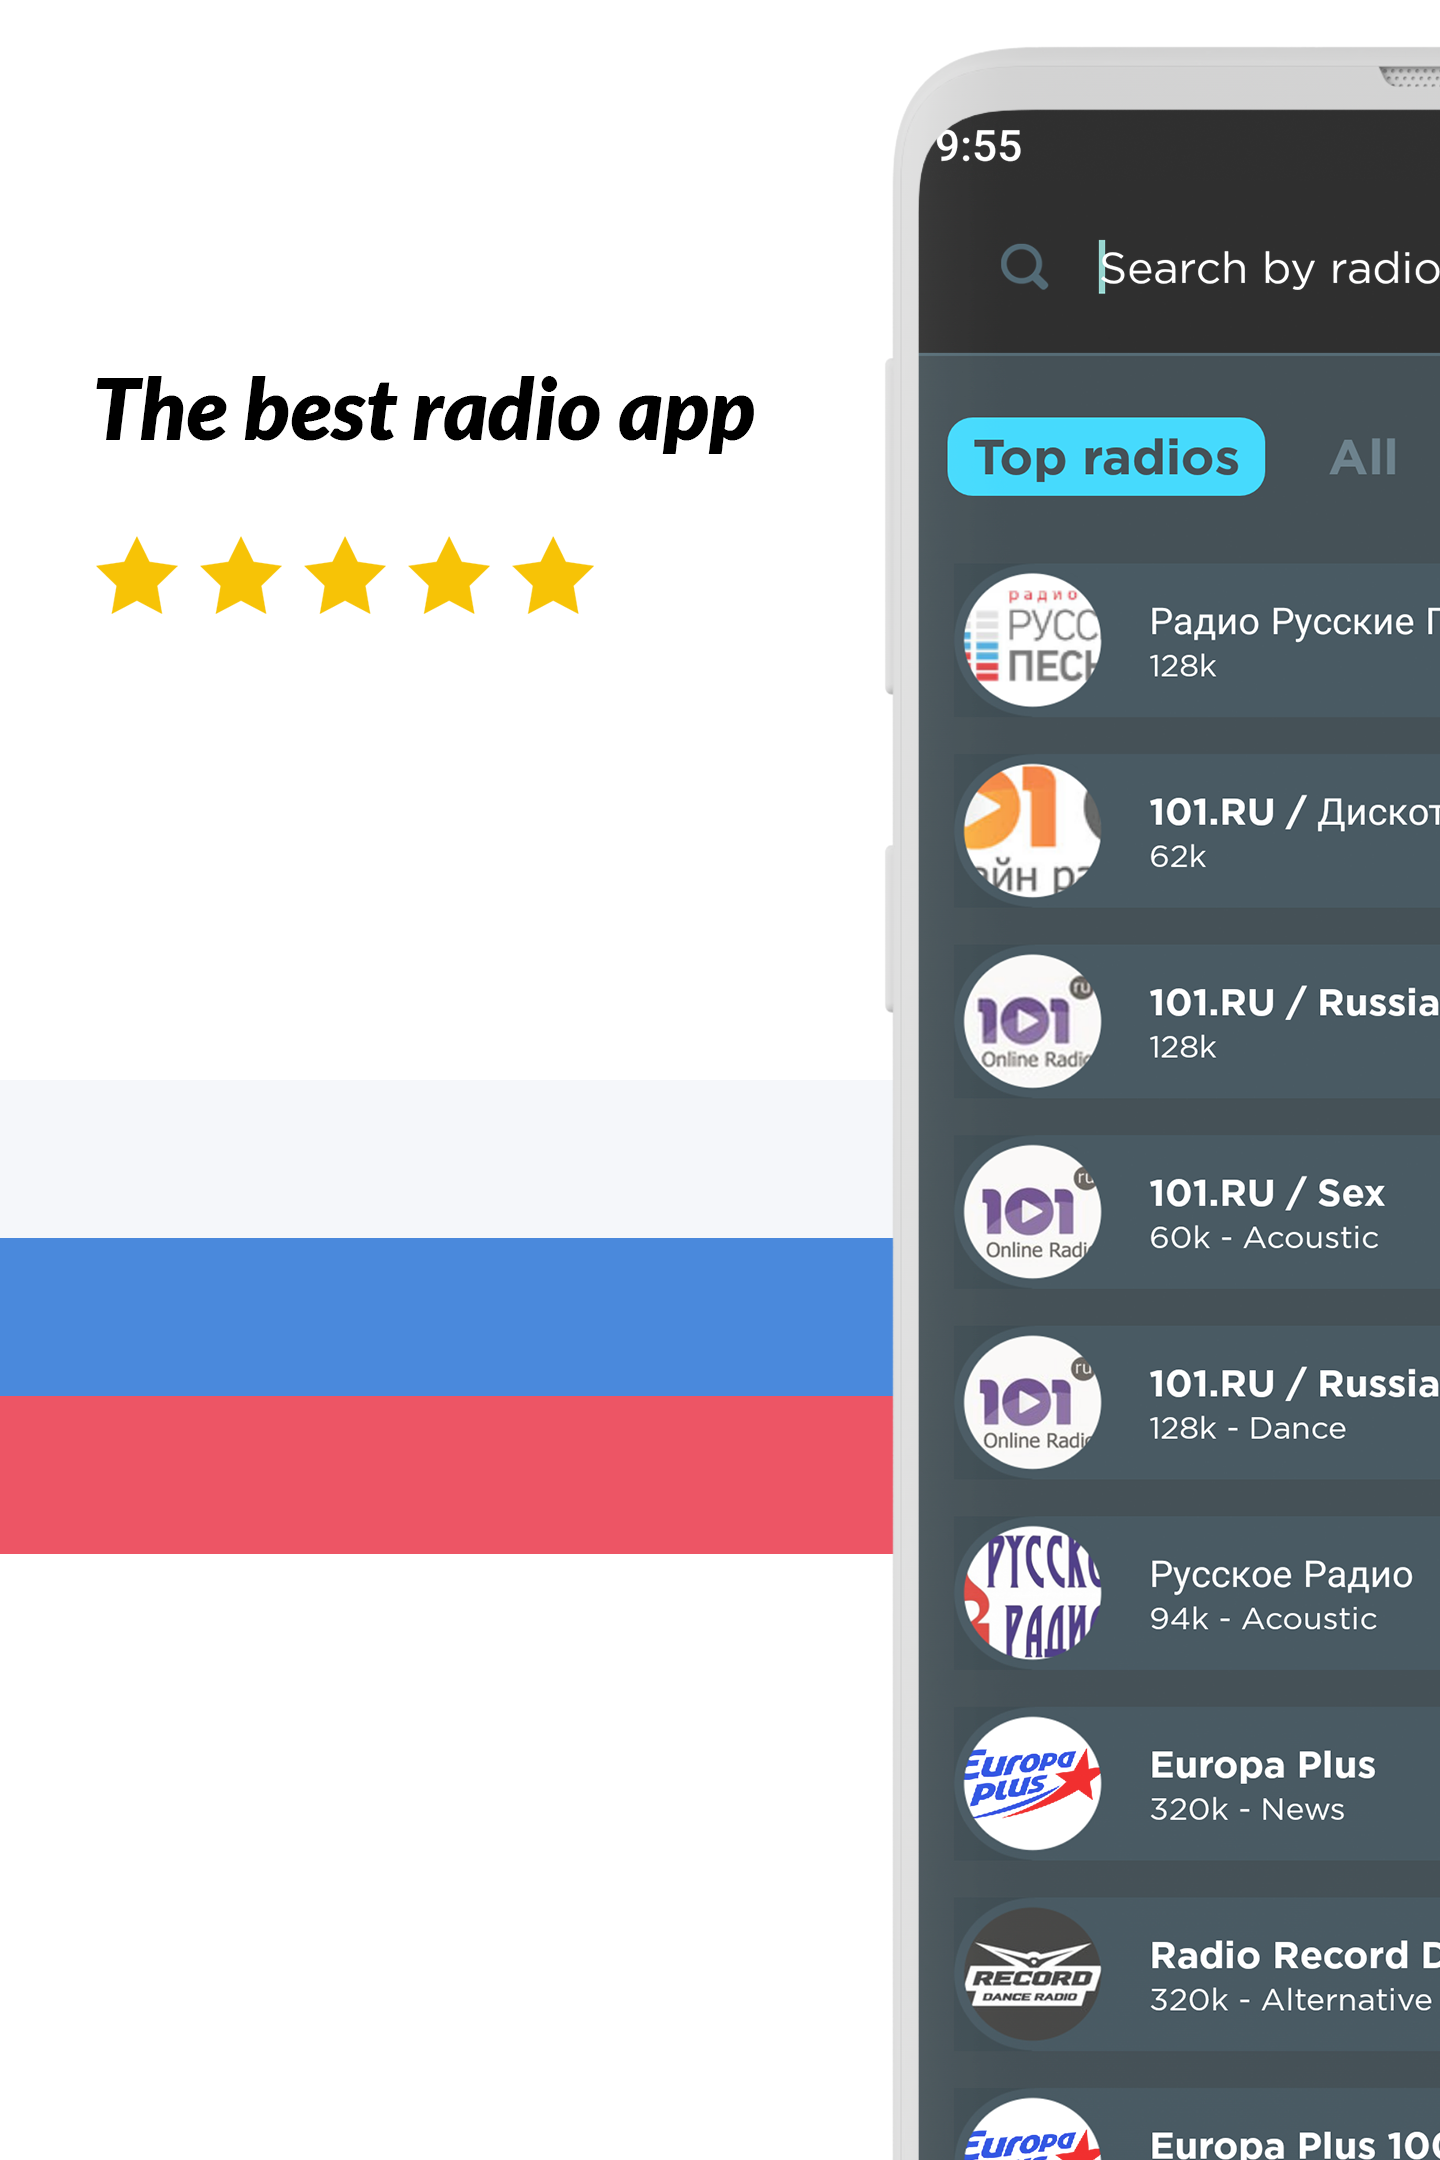 Radio Russia online APK 2.16.3 for Android – Download Radio Russia online  APK Latest Version from APKFab.com